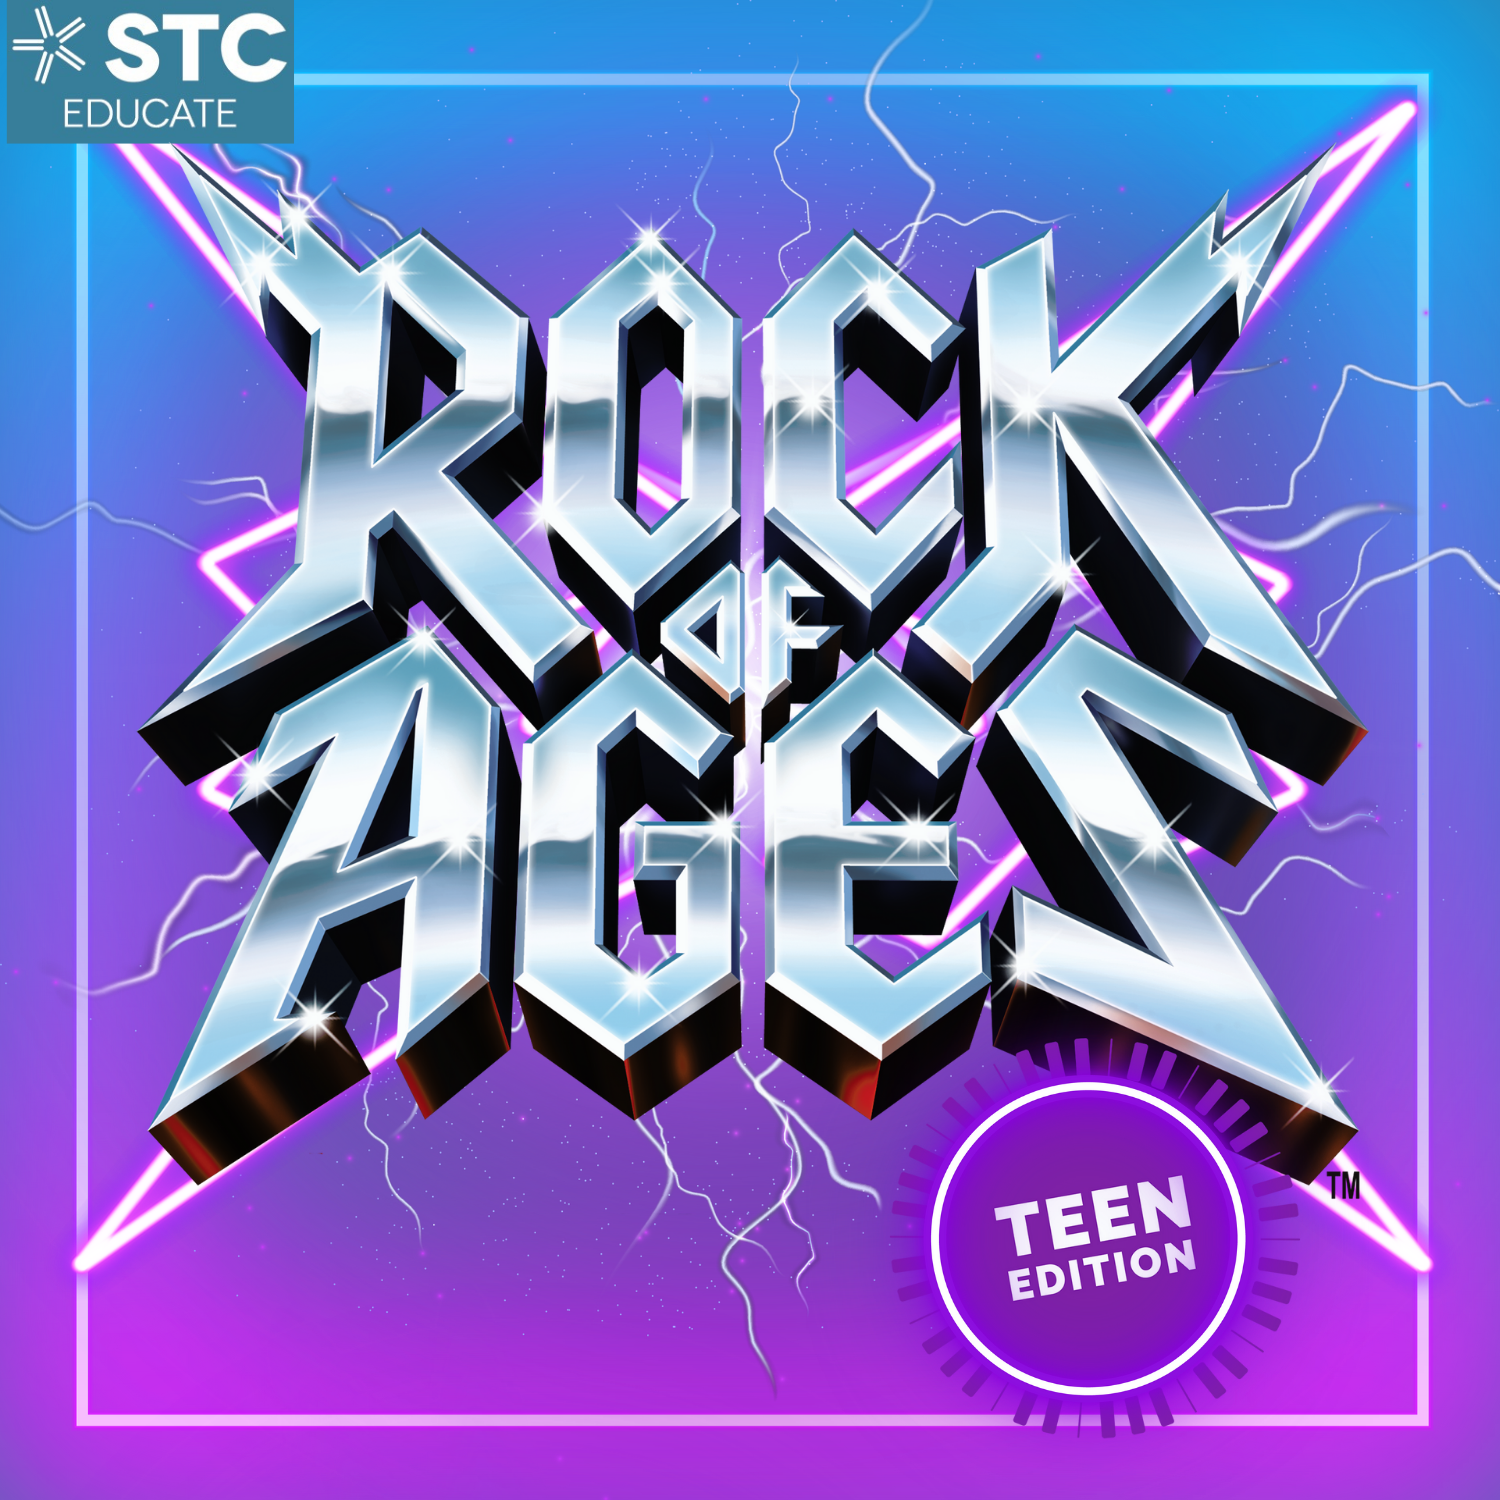 Rock of Ages: Teen Edition - STC - Sacramento Theatre Company